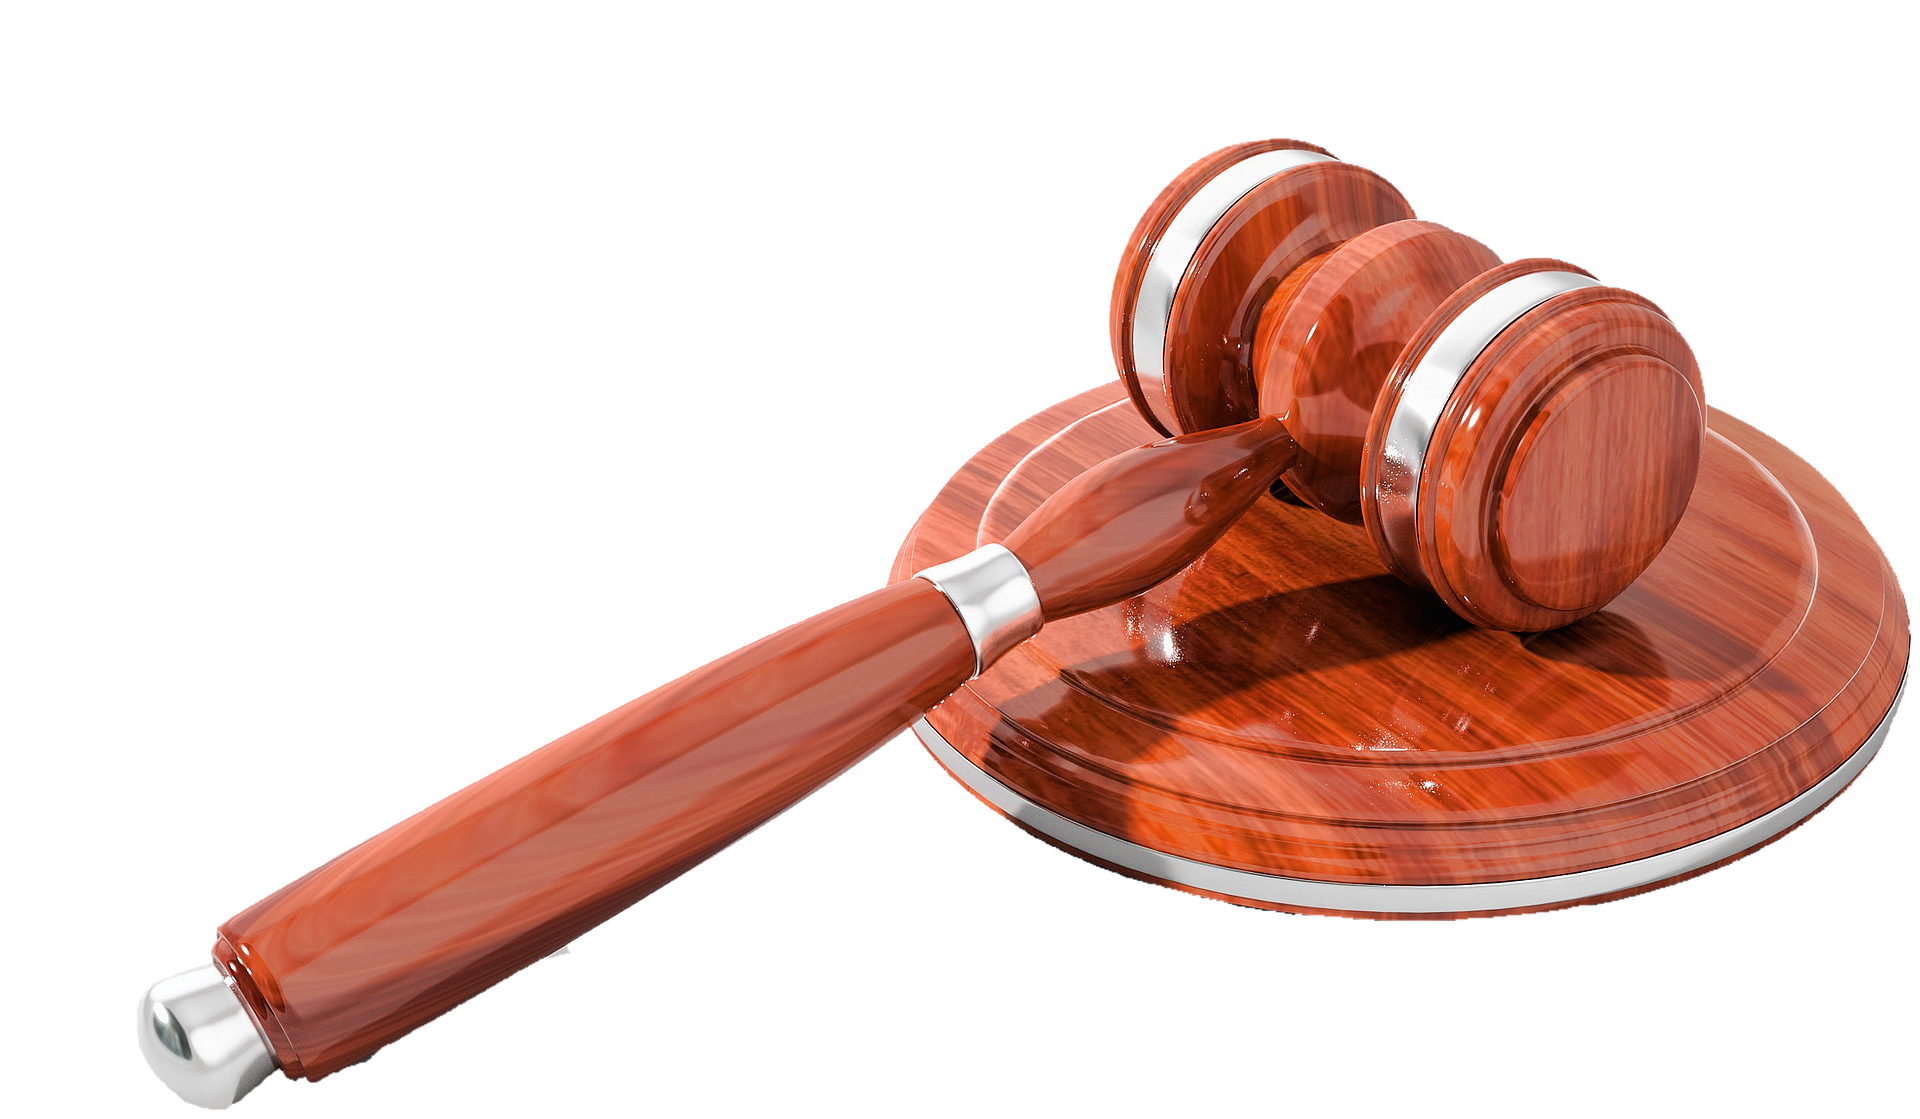 A gavel, typically seen in auctions; our Auction Conveyancing Solicitors discuss auction properties and how our team can help understand the complexities.